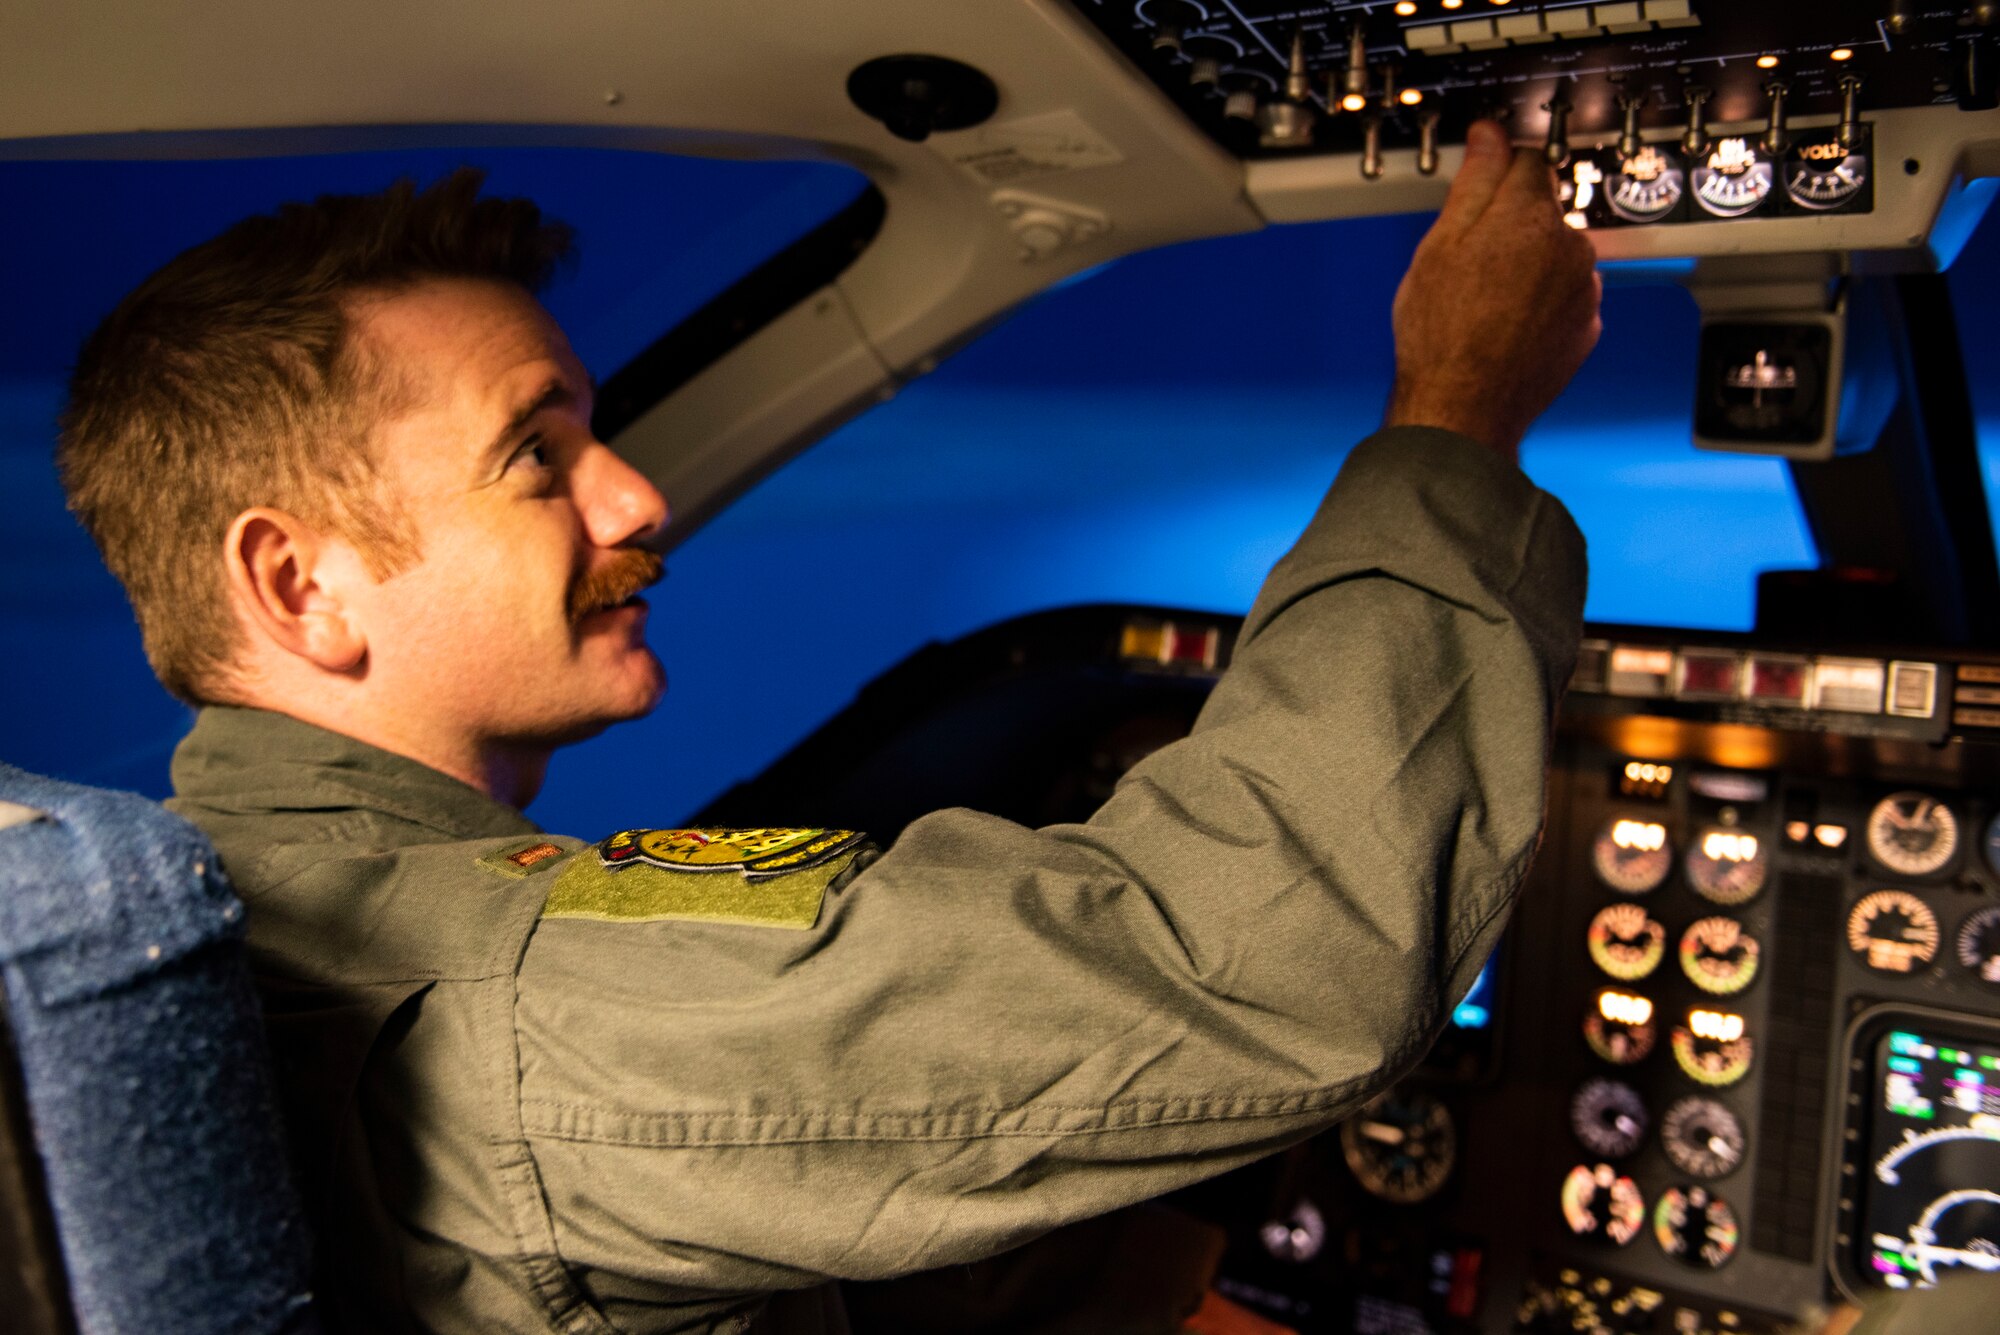 2nd Lt. John Jackson, 47th Flying Training Wing student pilot, straps into his seat and prepares for a simulated T-1 Jayhawk flight at Laughlin Air Force Base, Texas on Jul. 19, 2021. The simulators are state of the art equipment that can replicate any environment or situation that they may face when piloting the aircraft. (U.S. Air Force photo by Airman 1st Class David Phaff)